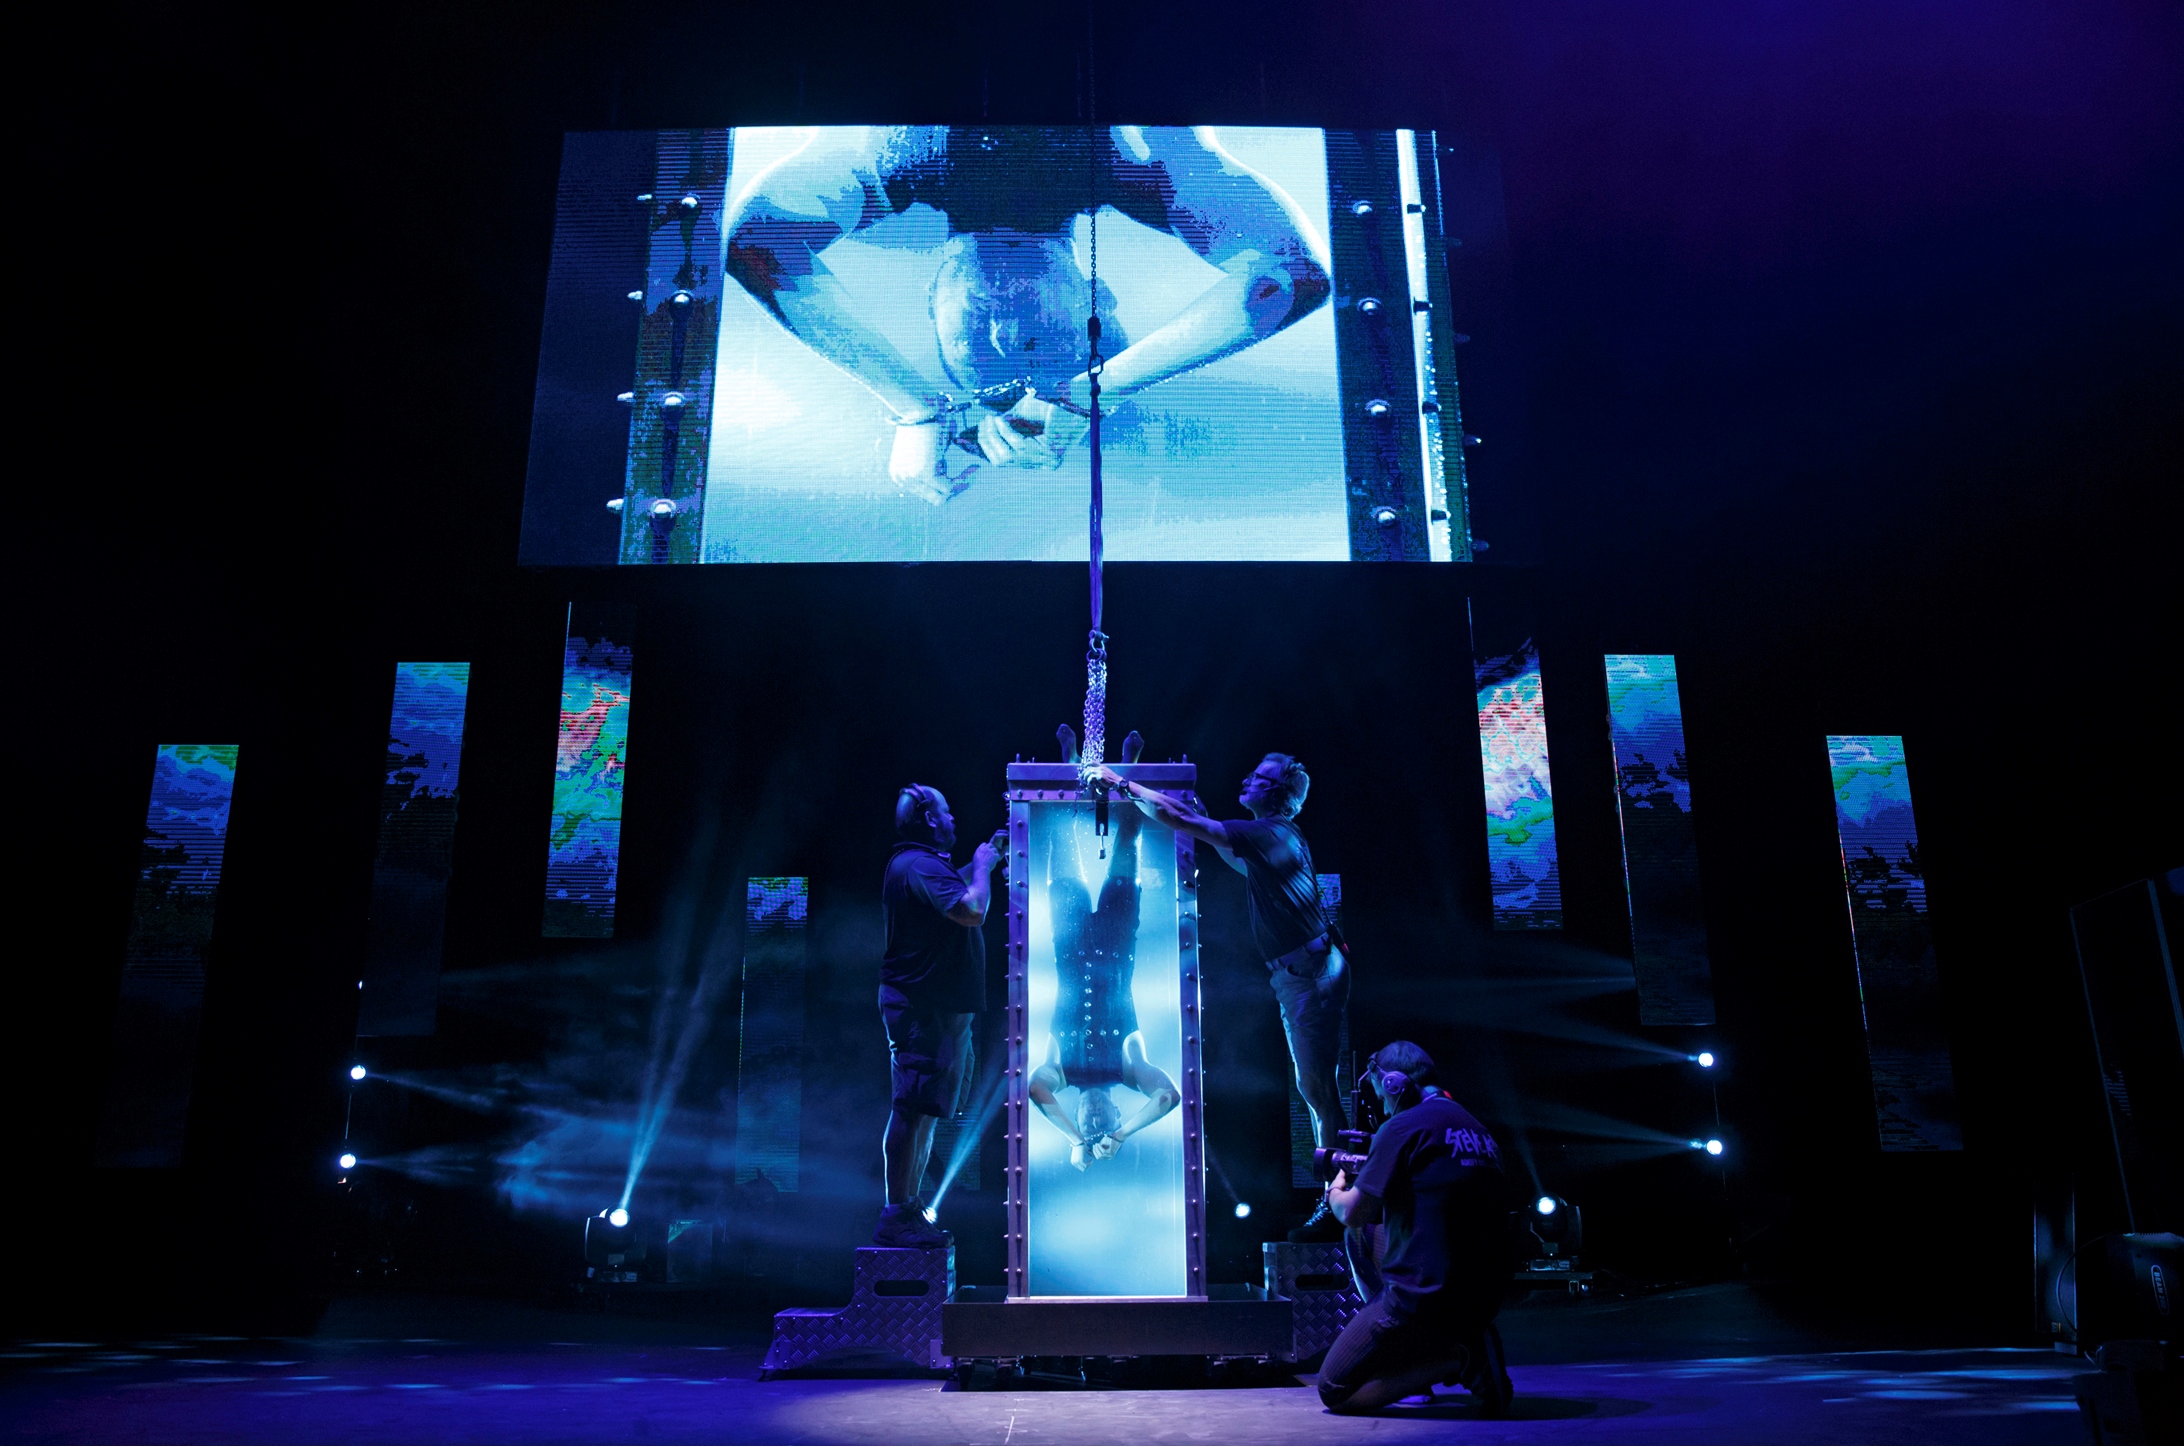 Illusionists, The: ? Witness the Impossible Marquis Theatre Synopsis: Seven illusionists enact mind-bending acts of magic and illusion; many have never been seen before. This critically acclaimed production is a mix of outrageous, jaw-dropping acts of grand illusion, levitation, mind-reading, disappearance and a full-view water escape. Cast List: The Manipulator, Yu Ho-Jin The Anti-Conjuror, Dan Sperry The Trickster, Jeff Hobson The Escapologist, Andrew Basso The Inventor, Kevin James The Warrior, Aaron Crow The Futurist, Adam Trent